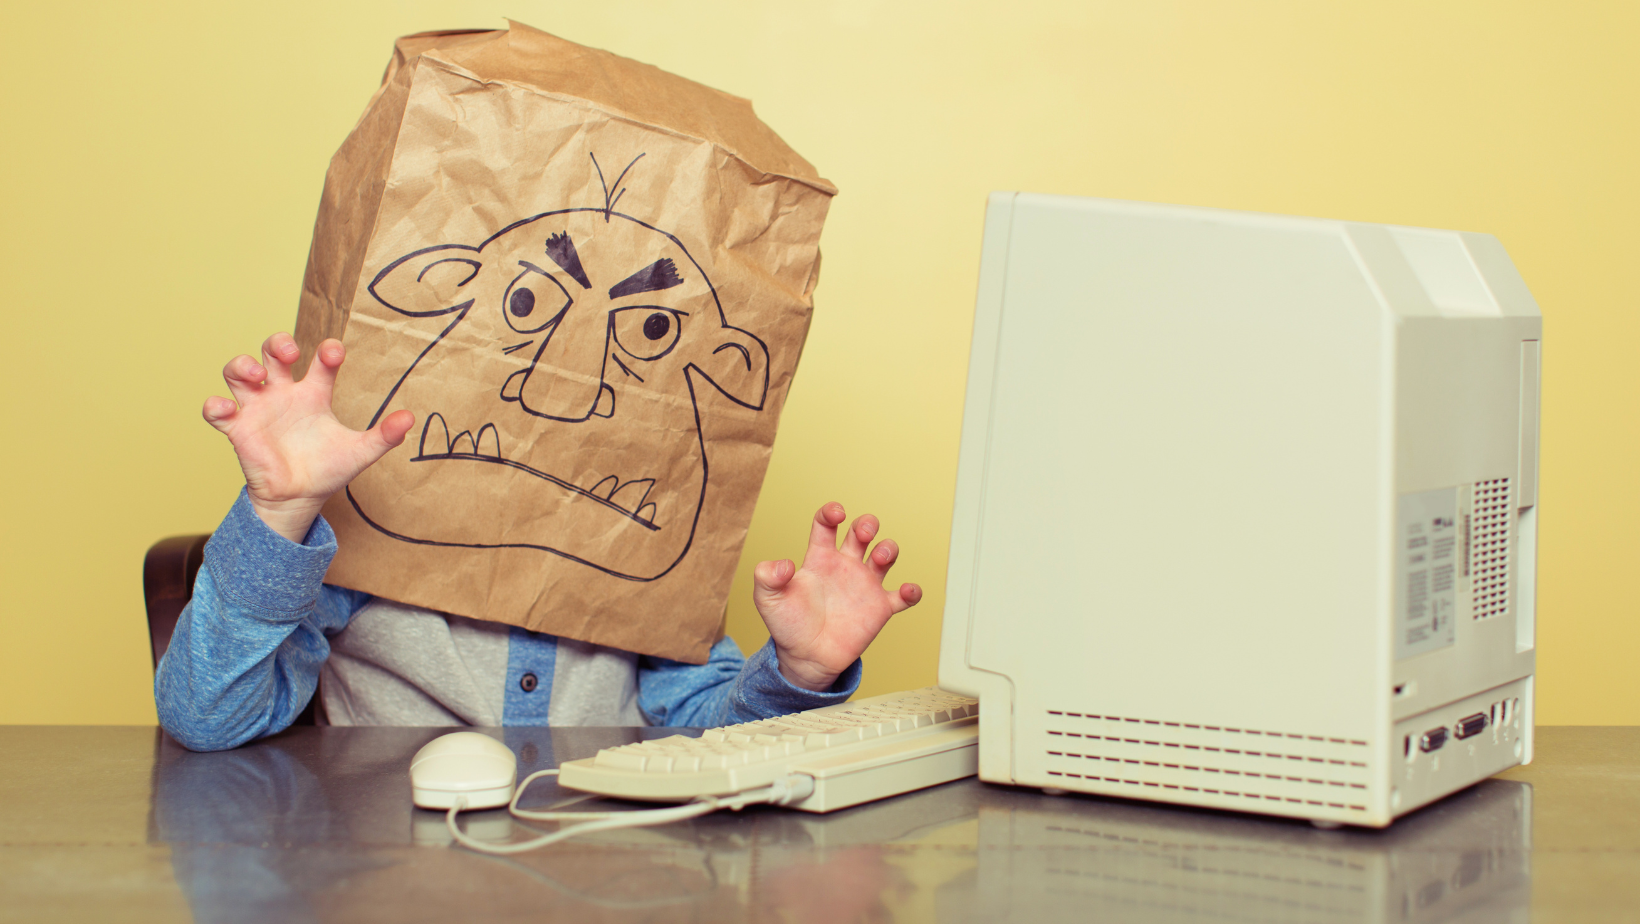 How To Deal With Trolls In An Online Chat Room